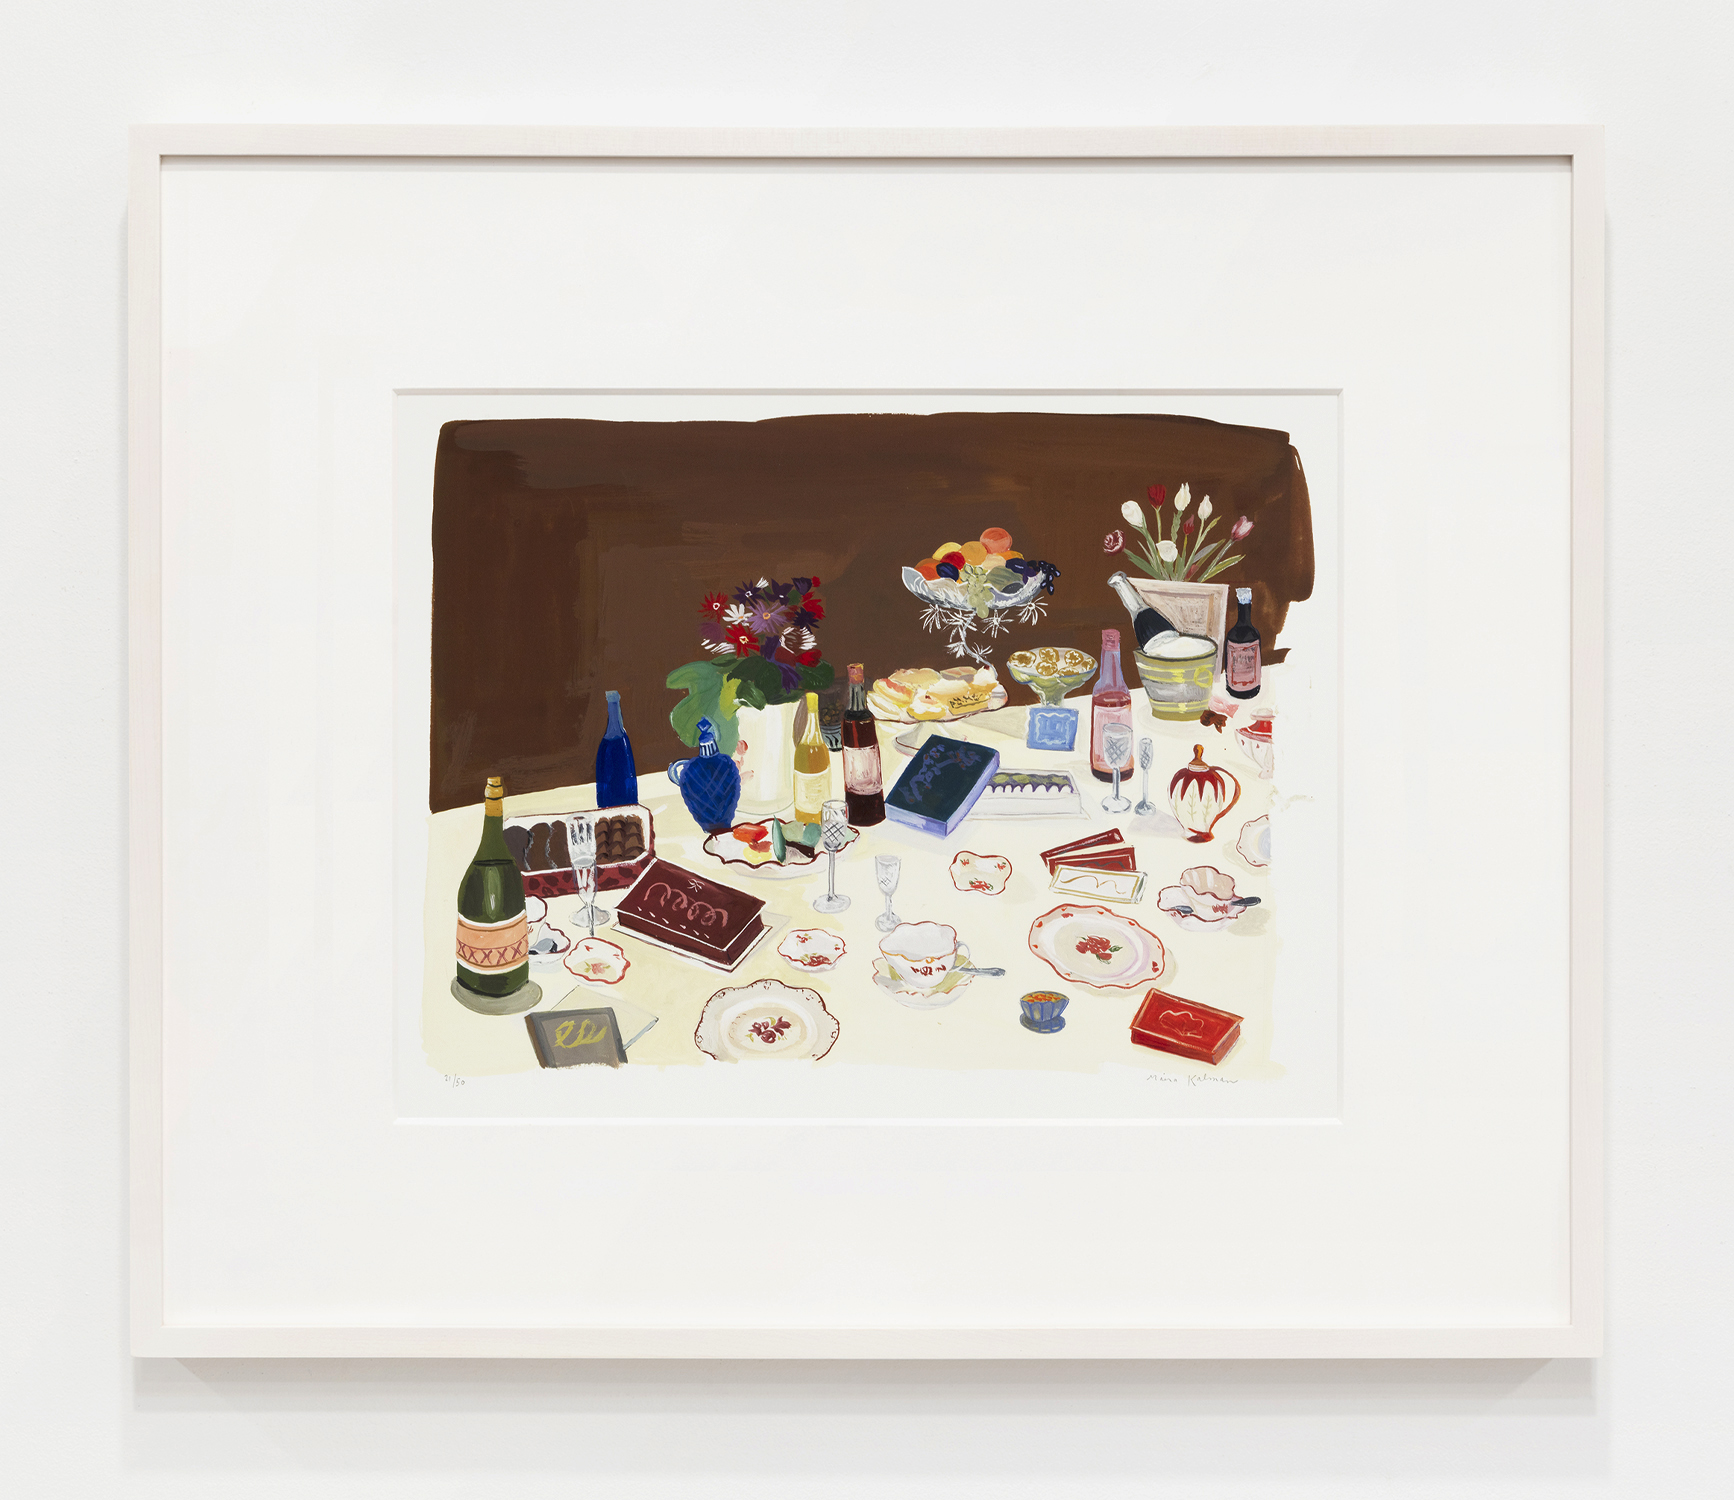 Maira Kalman Chocolate and Champagne party, 2013 Archival inkjet print Image Dimensions: 10 1/2 x 14 inches (26.7 x 35.6 cm) Paper Dimensions: 15 x 18 1/2 inches (38.1 x 47 cm) Framed Dimensions: 18 x 21 1/2 inches (45.7 x 54.6 cm) Edition of 50